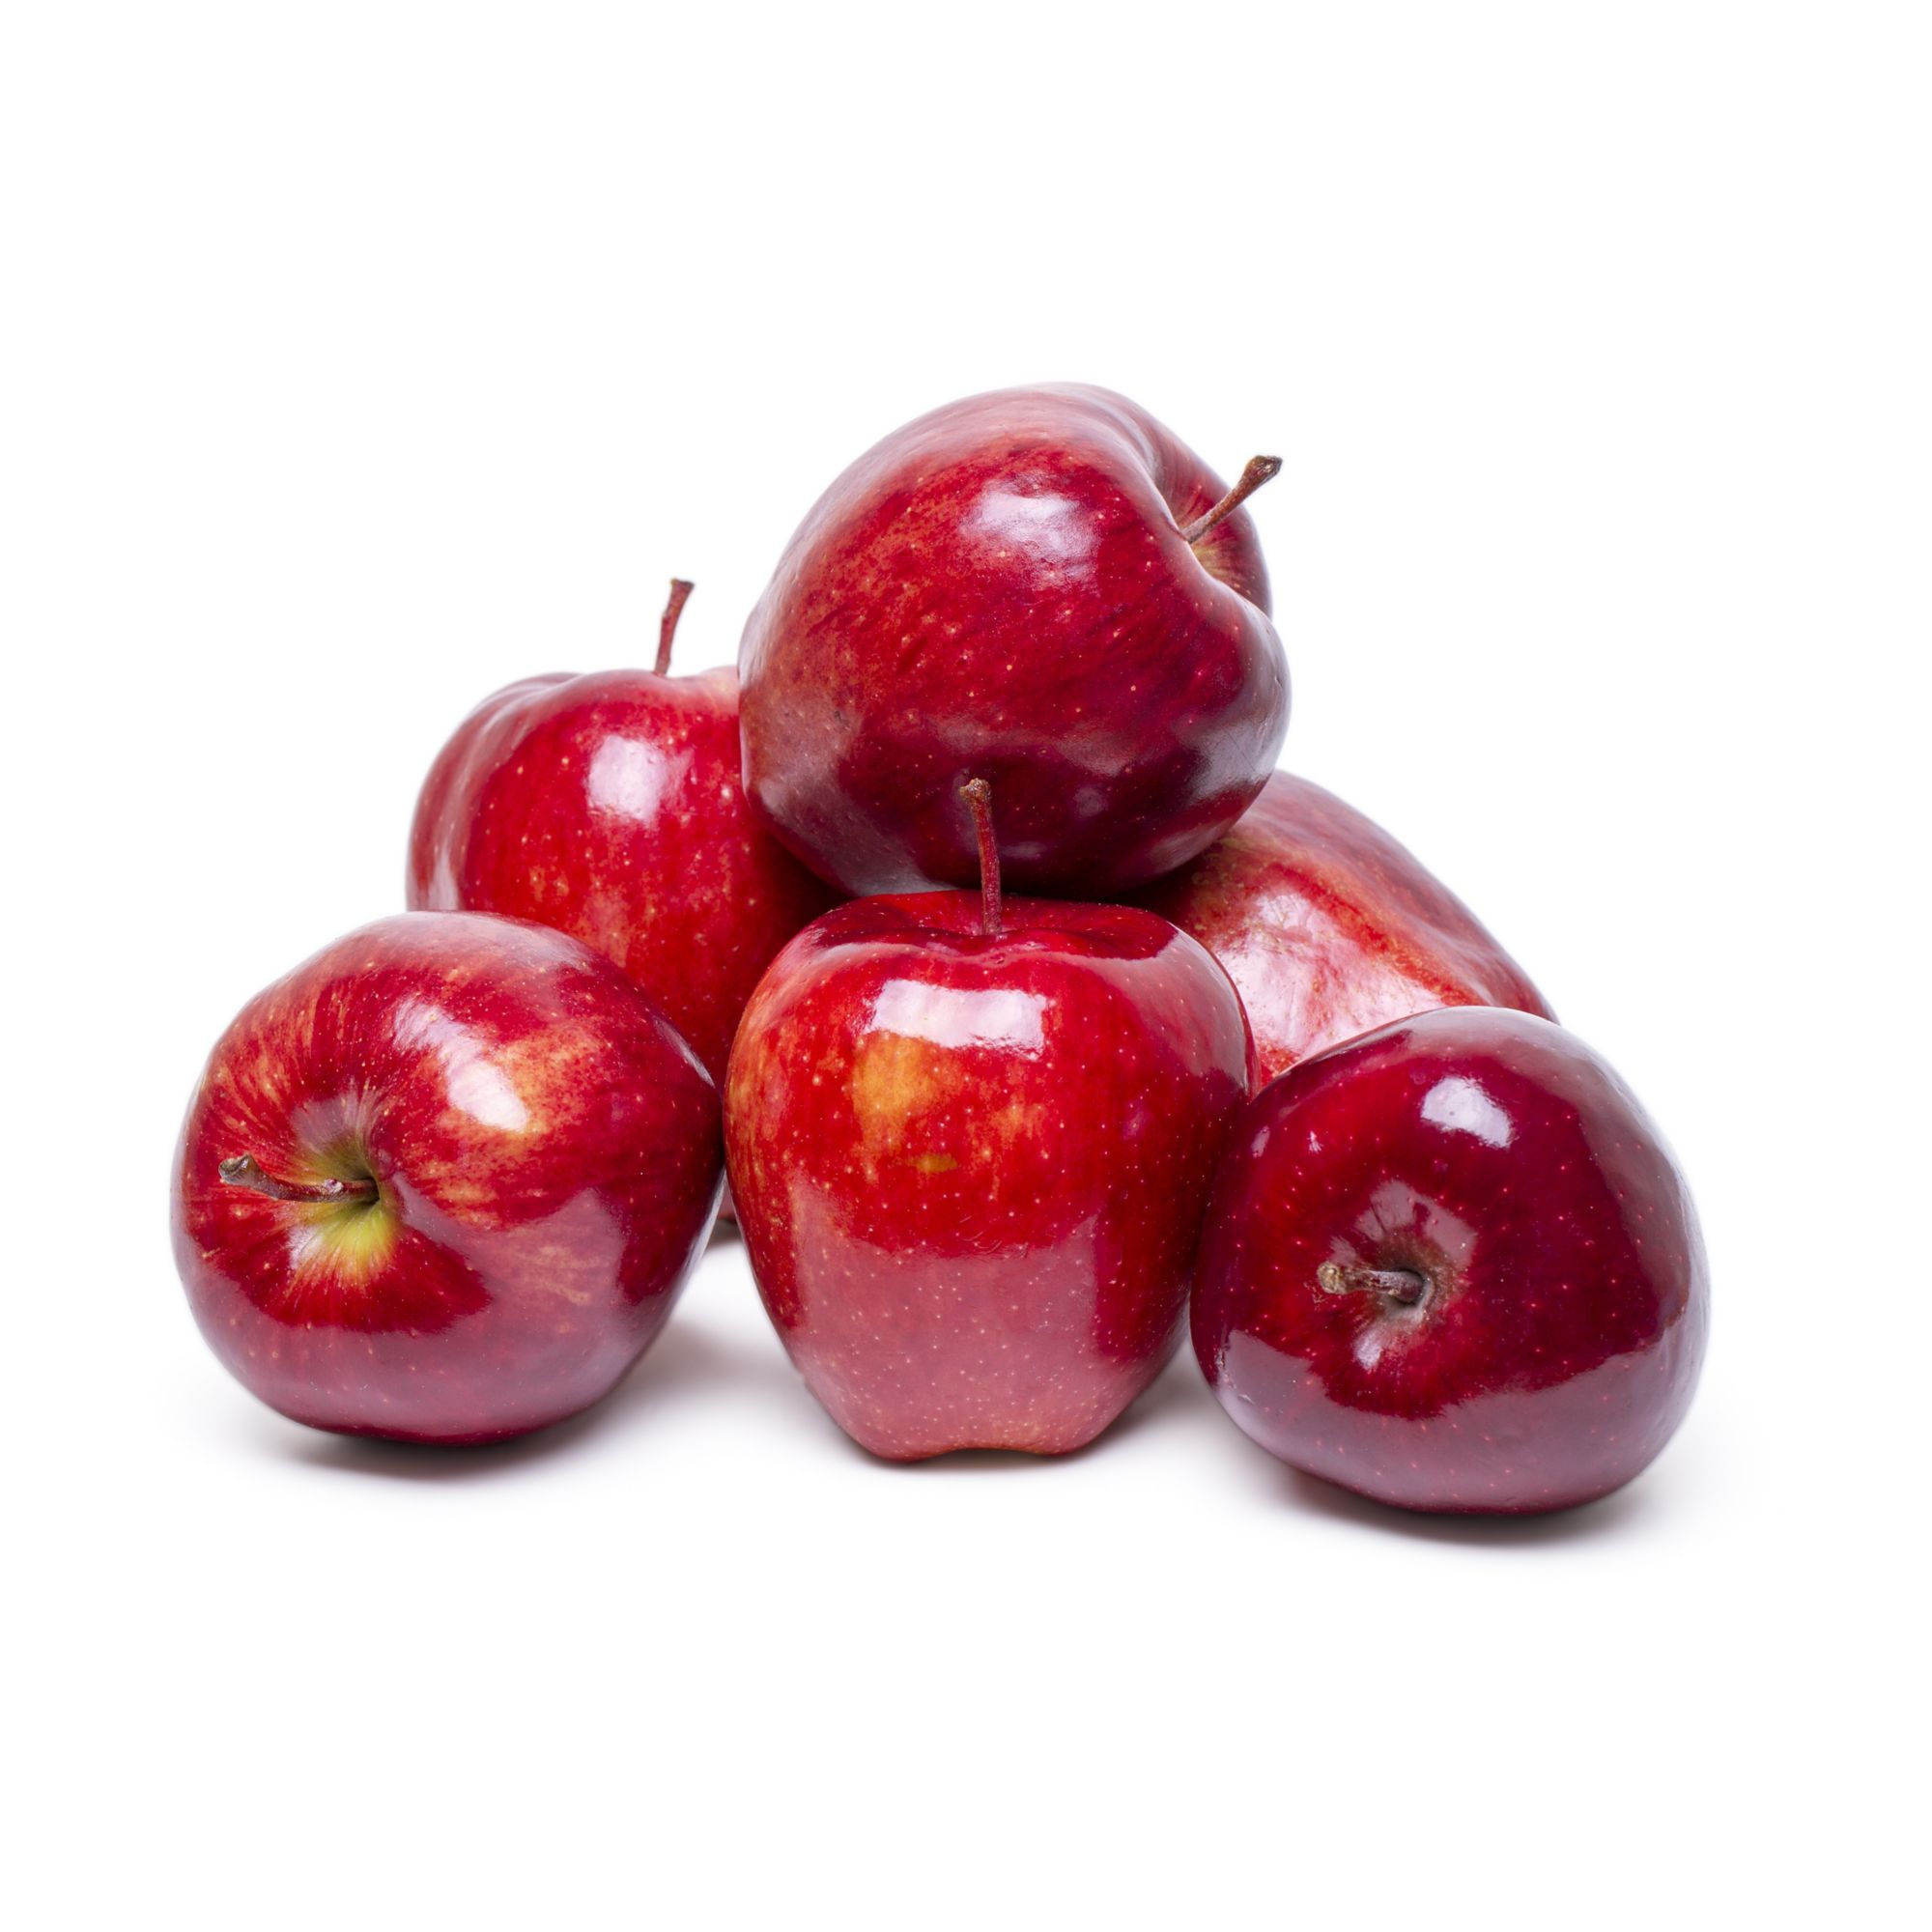 Wellsley Farms Red Delicious Apples, 5 lbs.